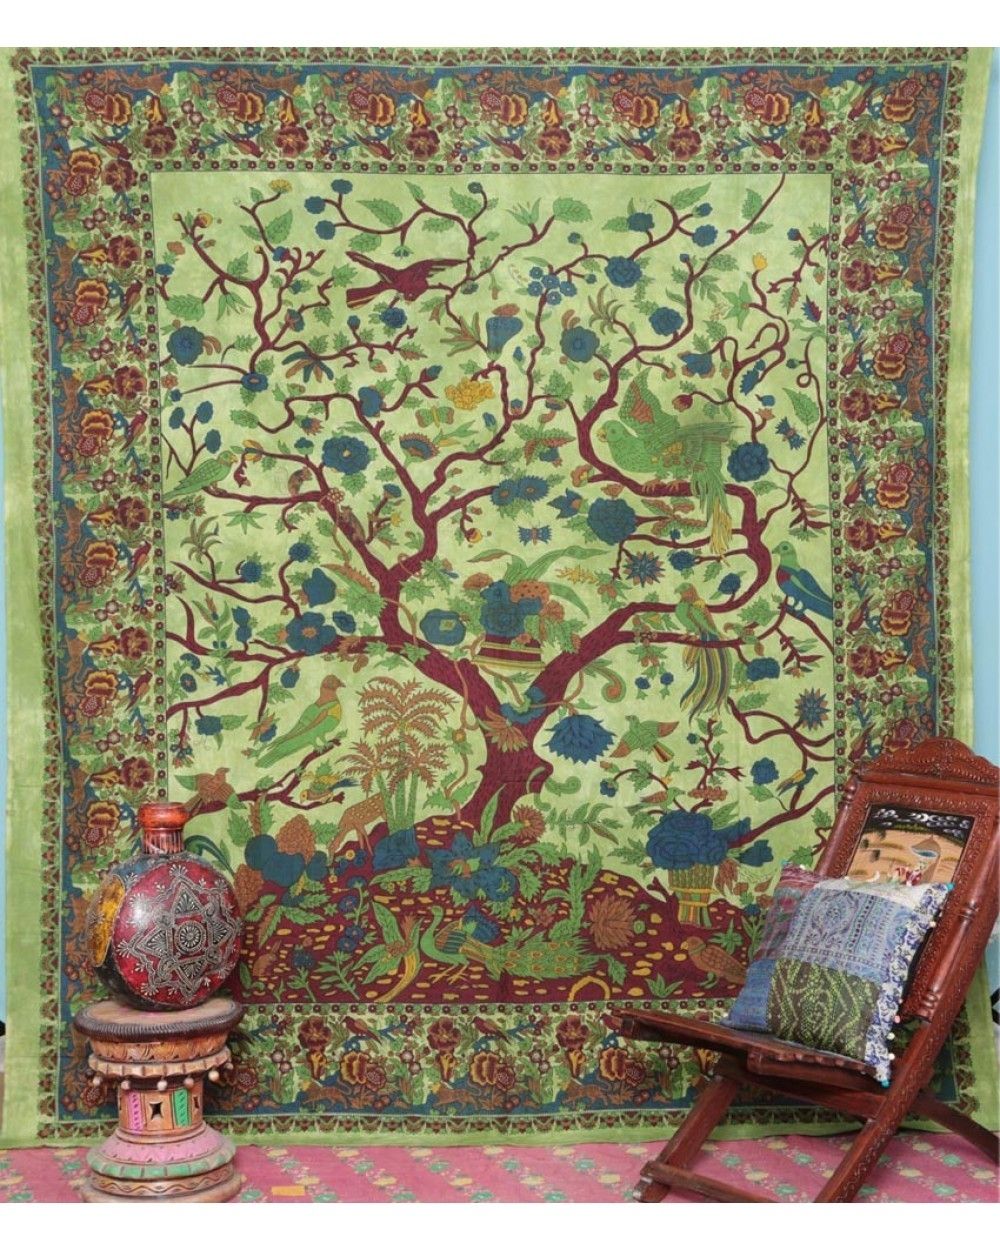 Tree Of Life Bedspread Home Decor Intended For Tree Of Life Wall Art (View 19 of 20)